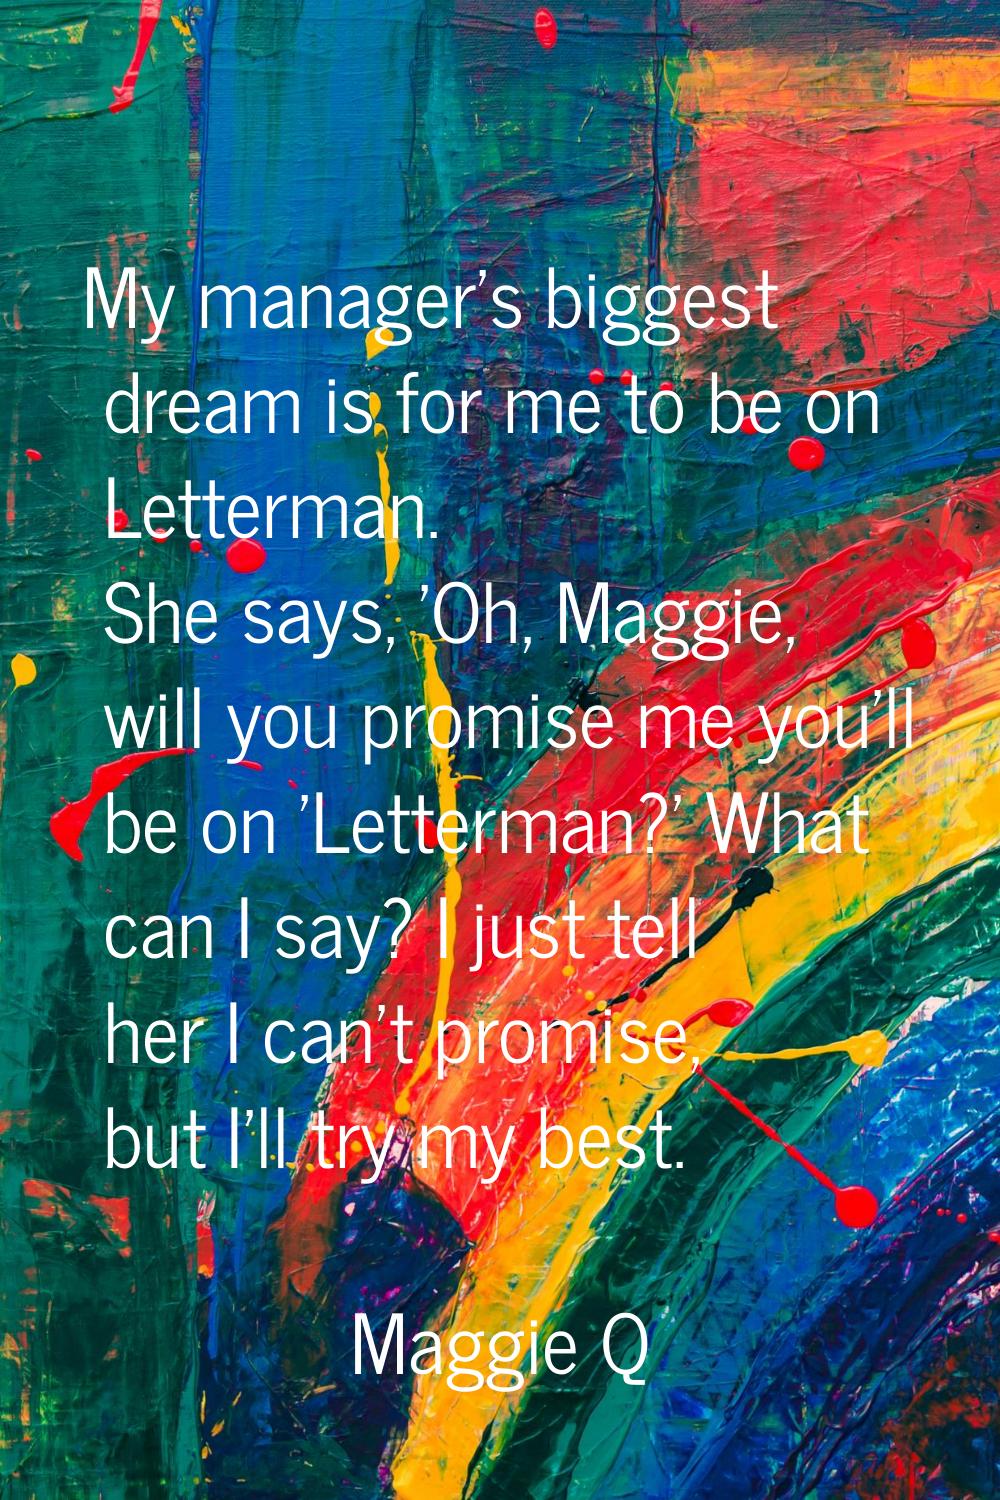 My manager's biggest dream is for me to be on Letterman. She says, 'Oh, Maggie, will you promise me